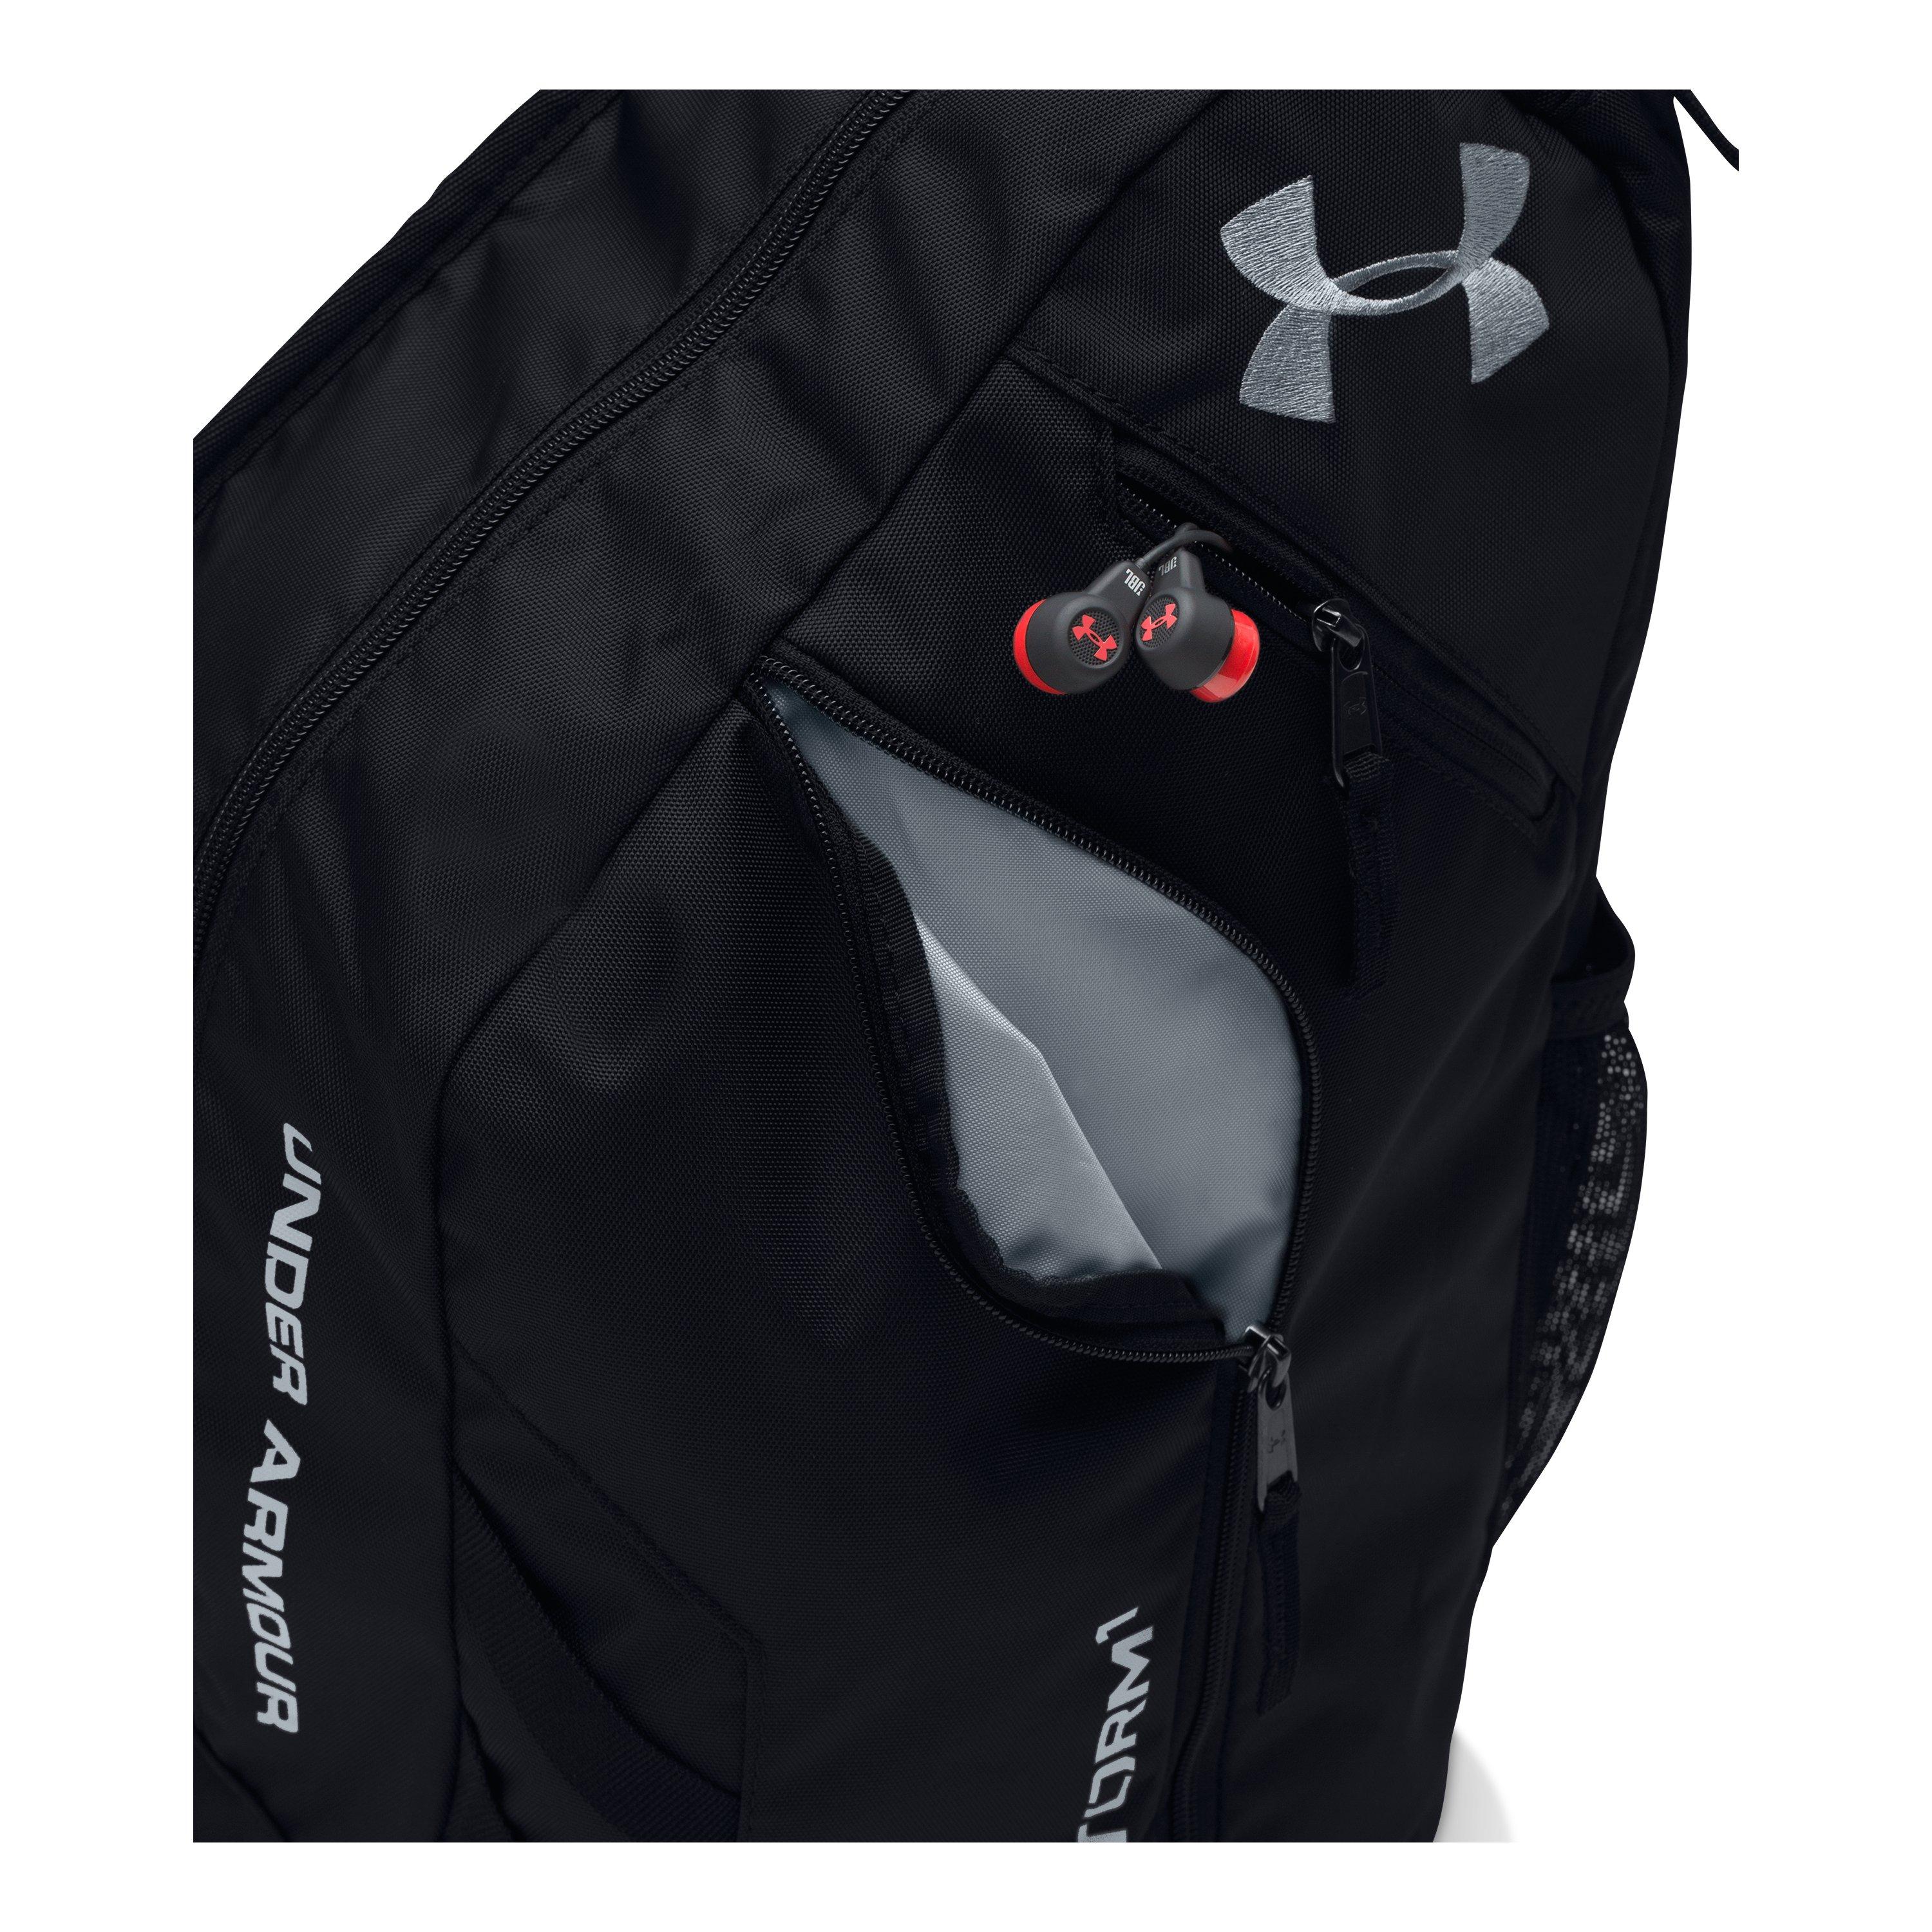 Under Armour Ua Compel Sling 2.0 Backpack in Black | Lyst